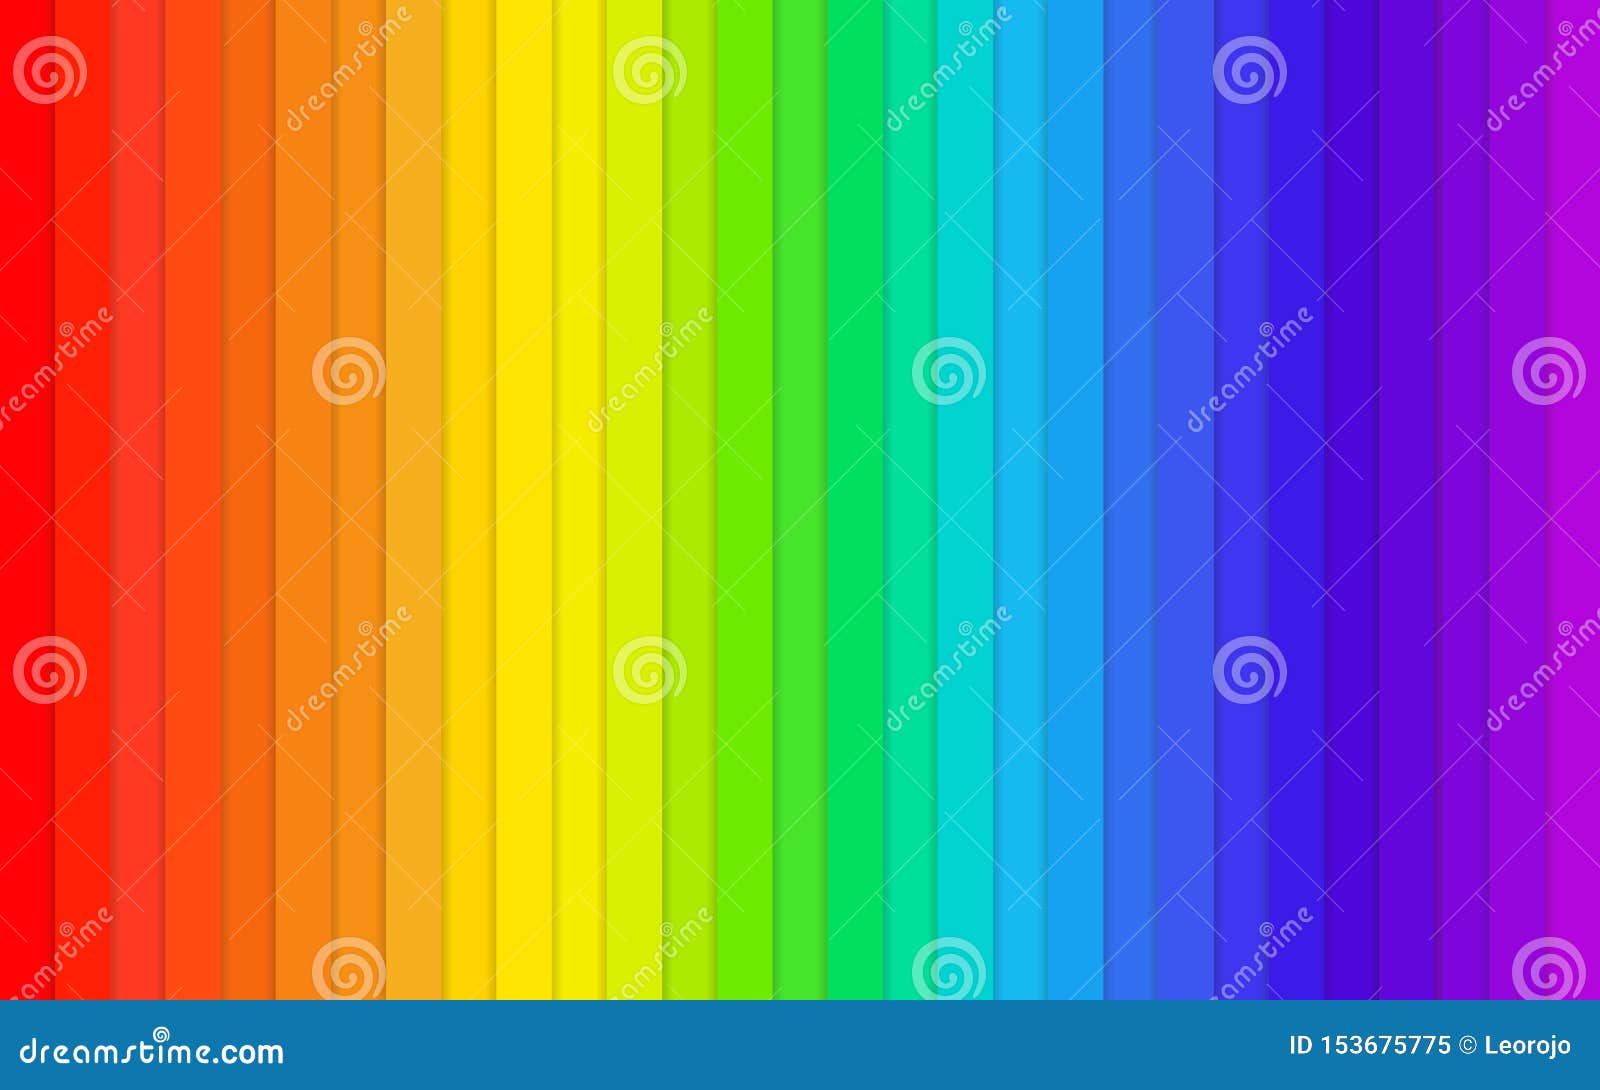 Rainbow Background Table Colors Palette Stock Image - Image of pattern